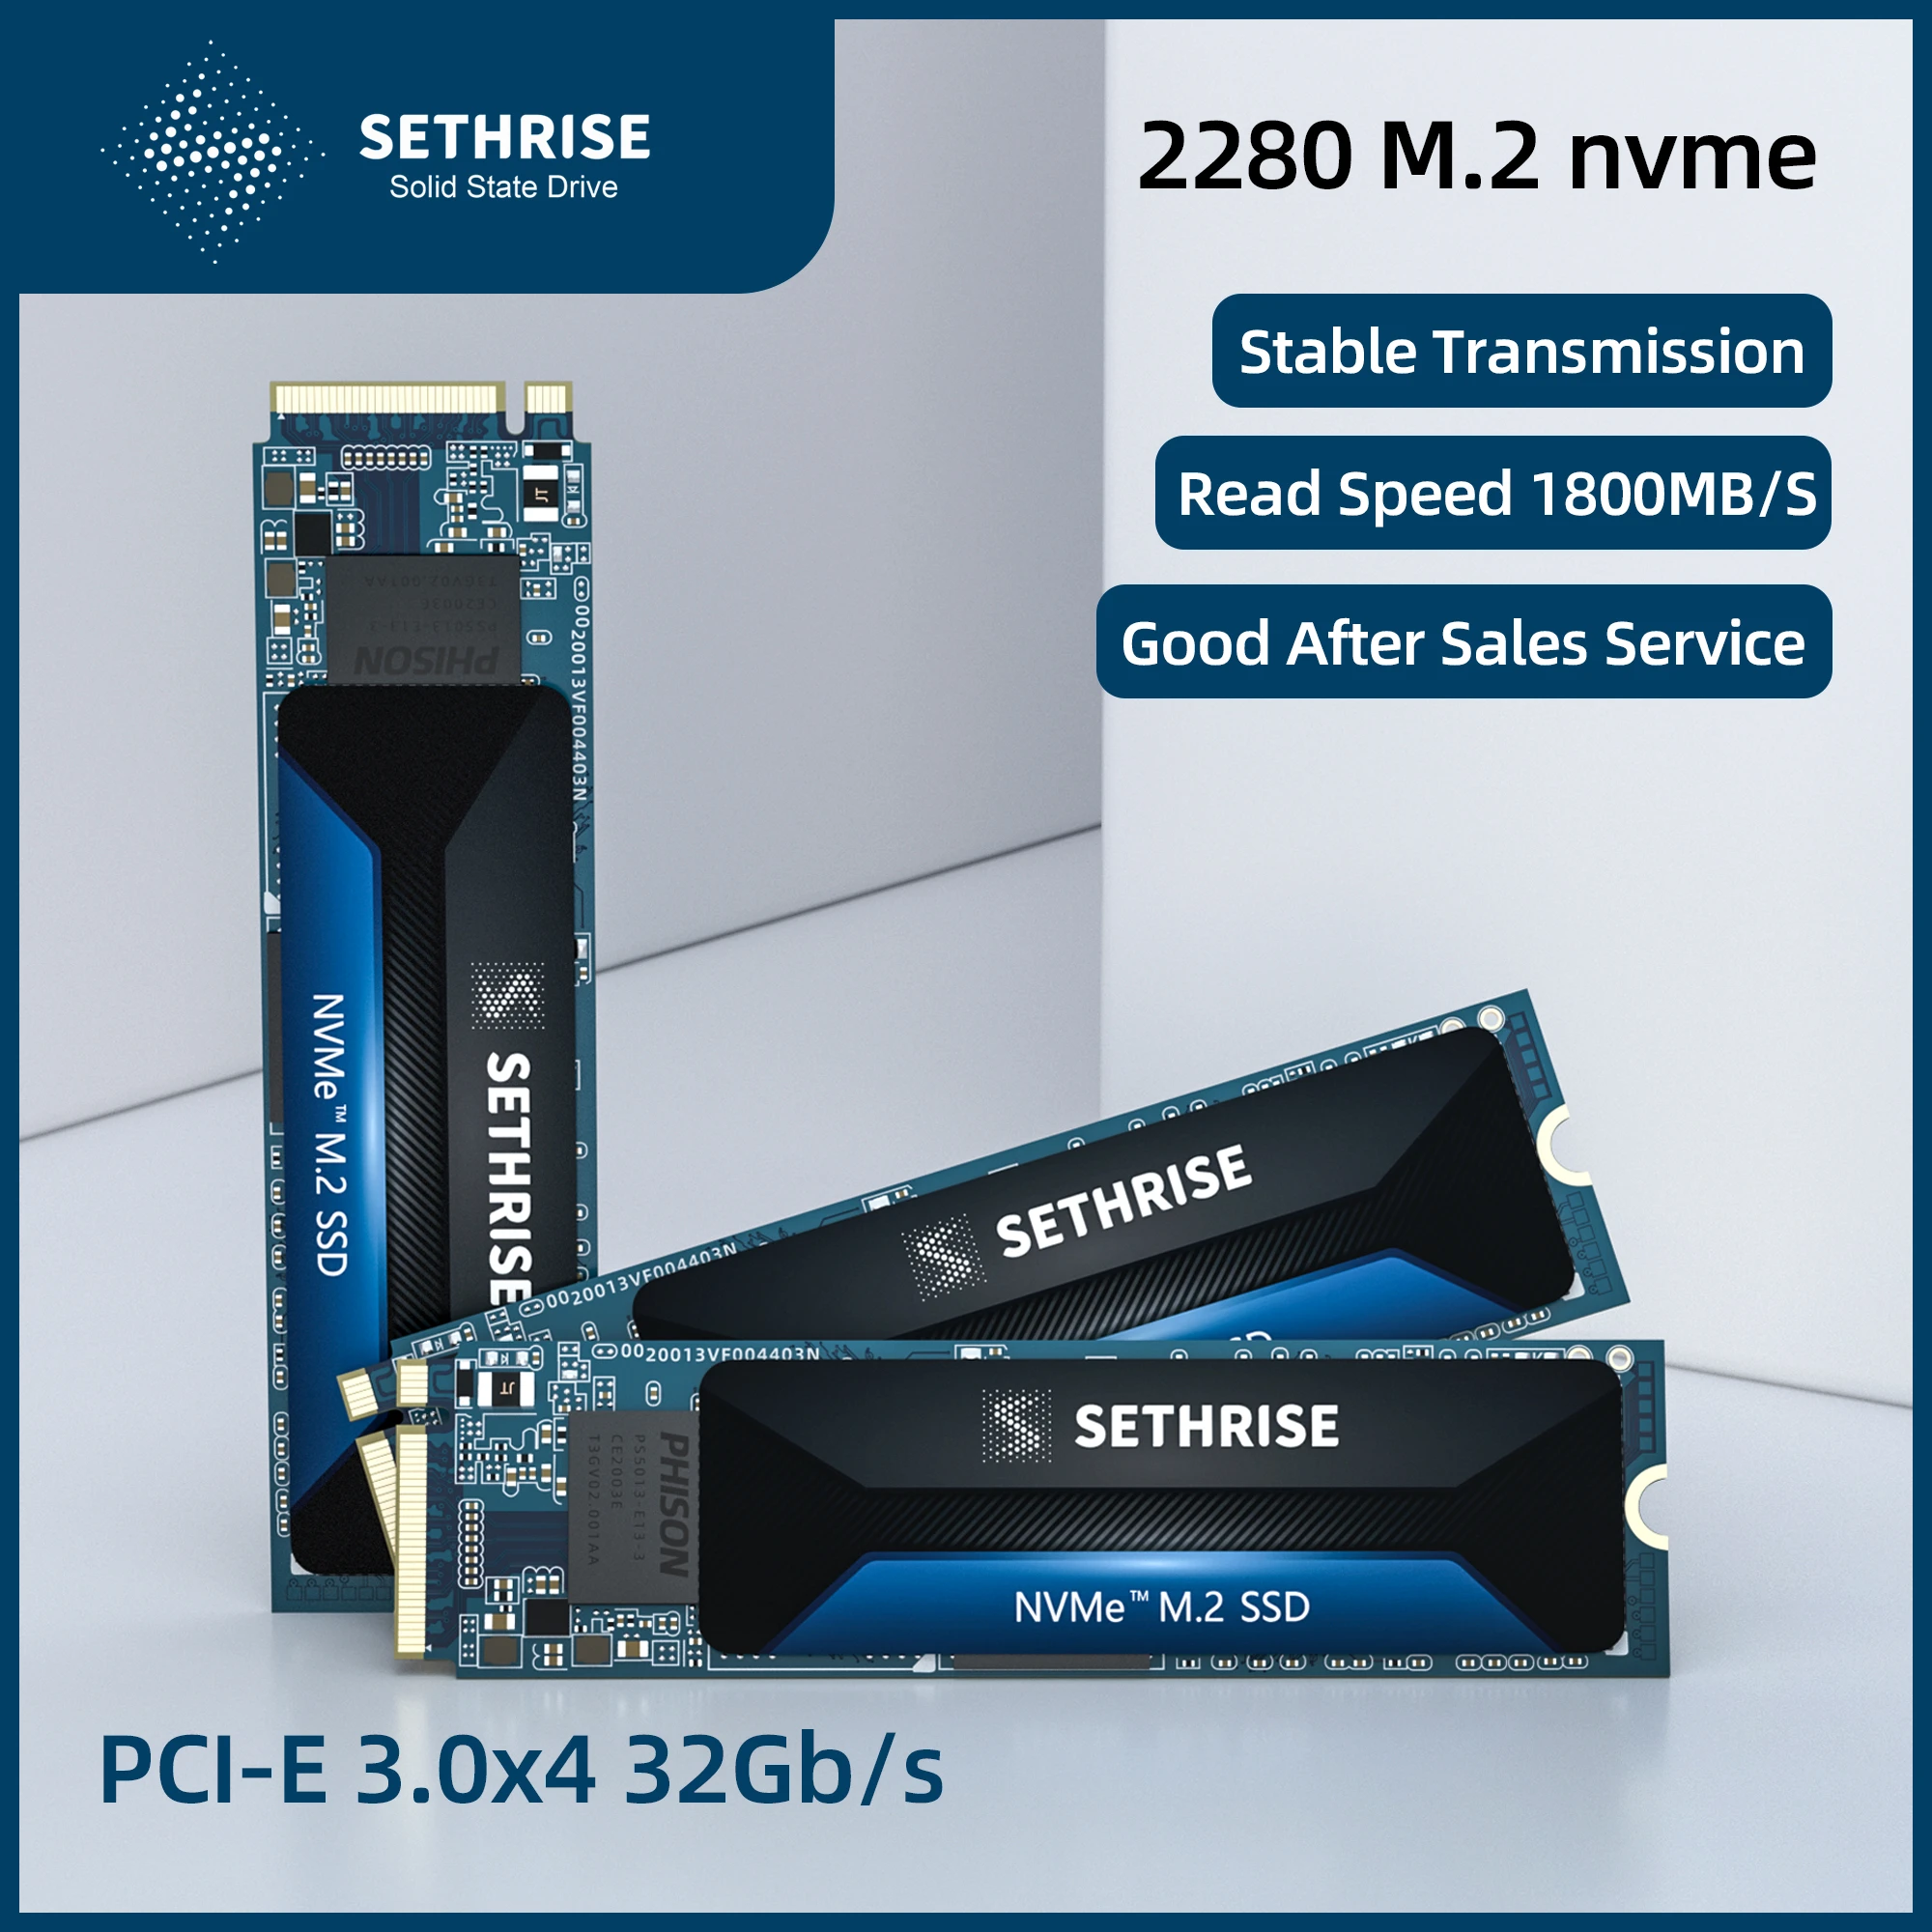 sethrise Internal SSD M2 nvme hard disk 256G/512G/1T solid state drive pci-e 3.0x4 for desktop and laptop